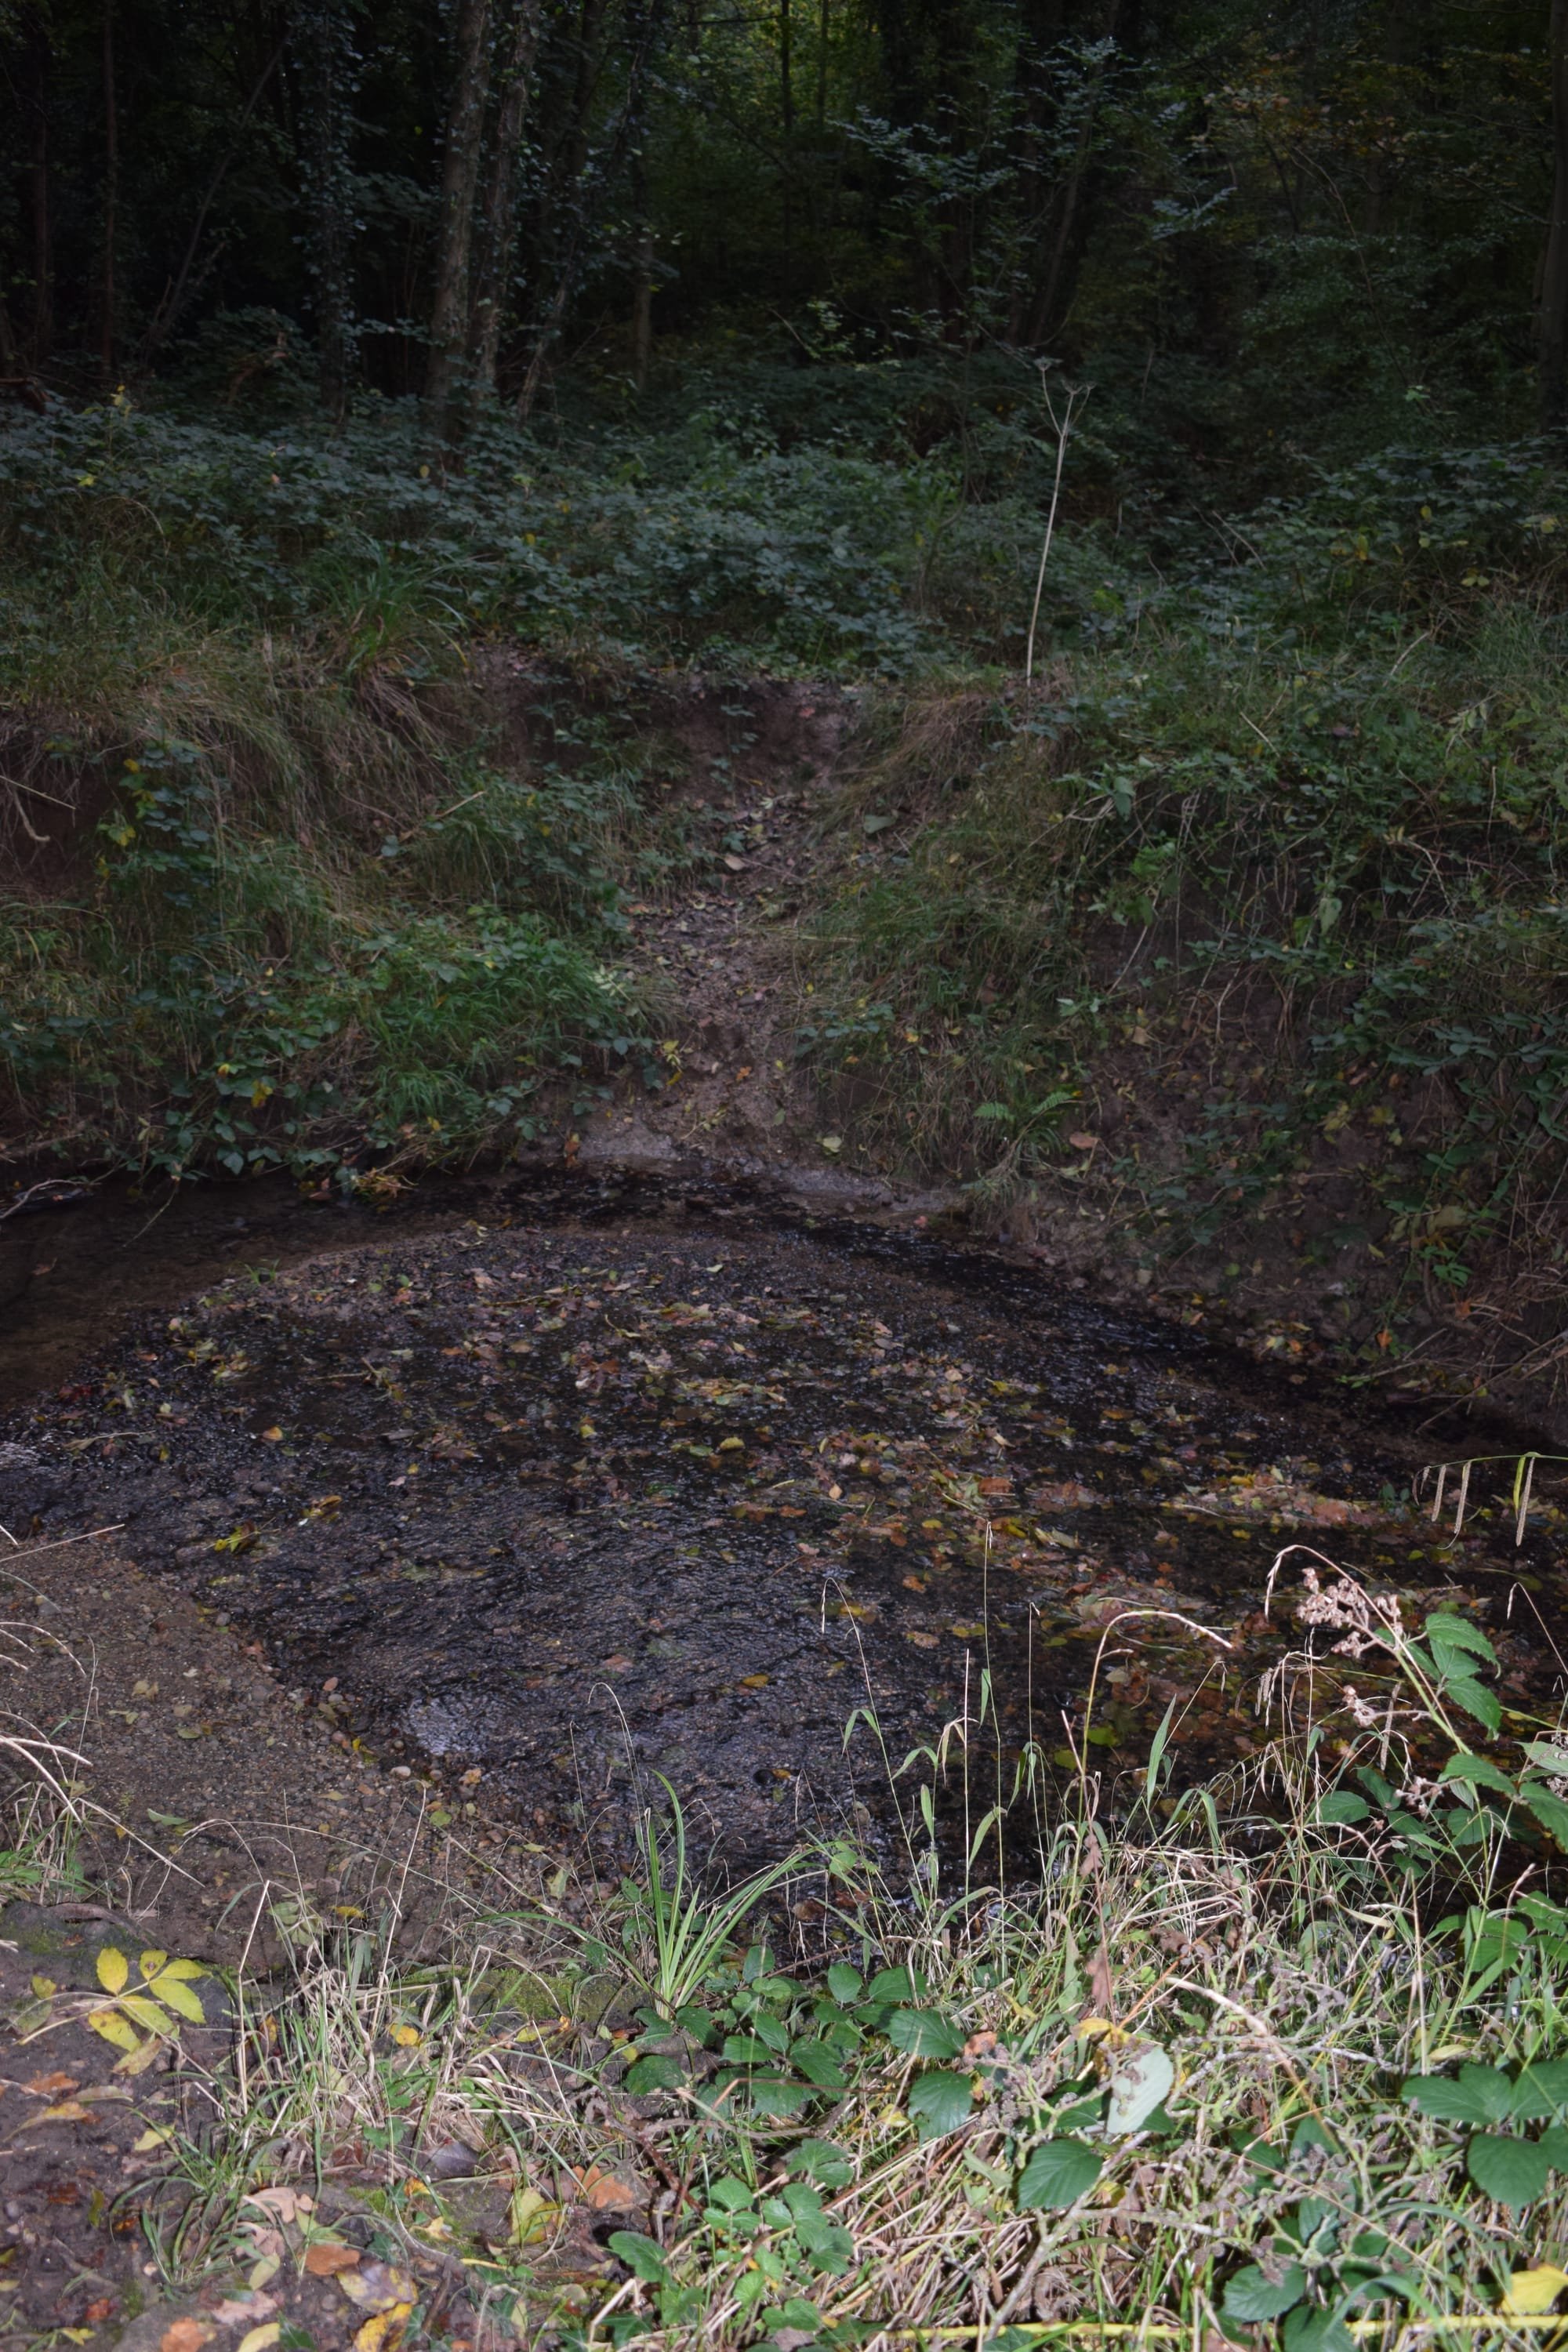 There are several bomb craters from the second world war in the western woods